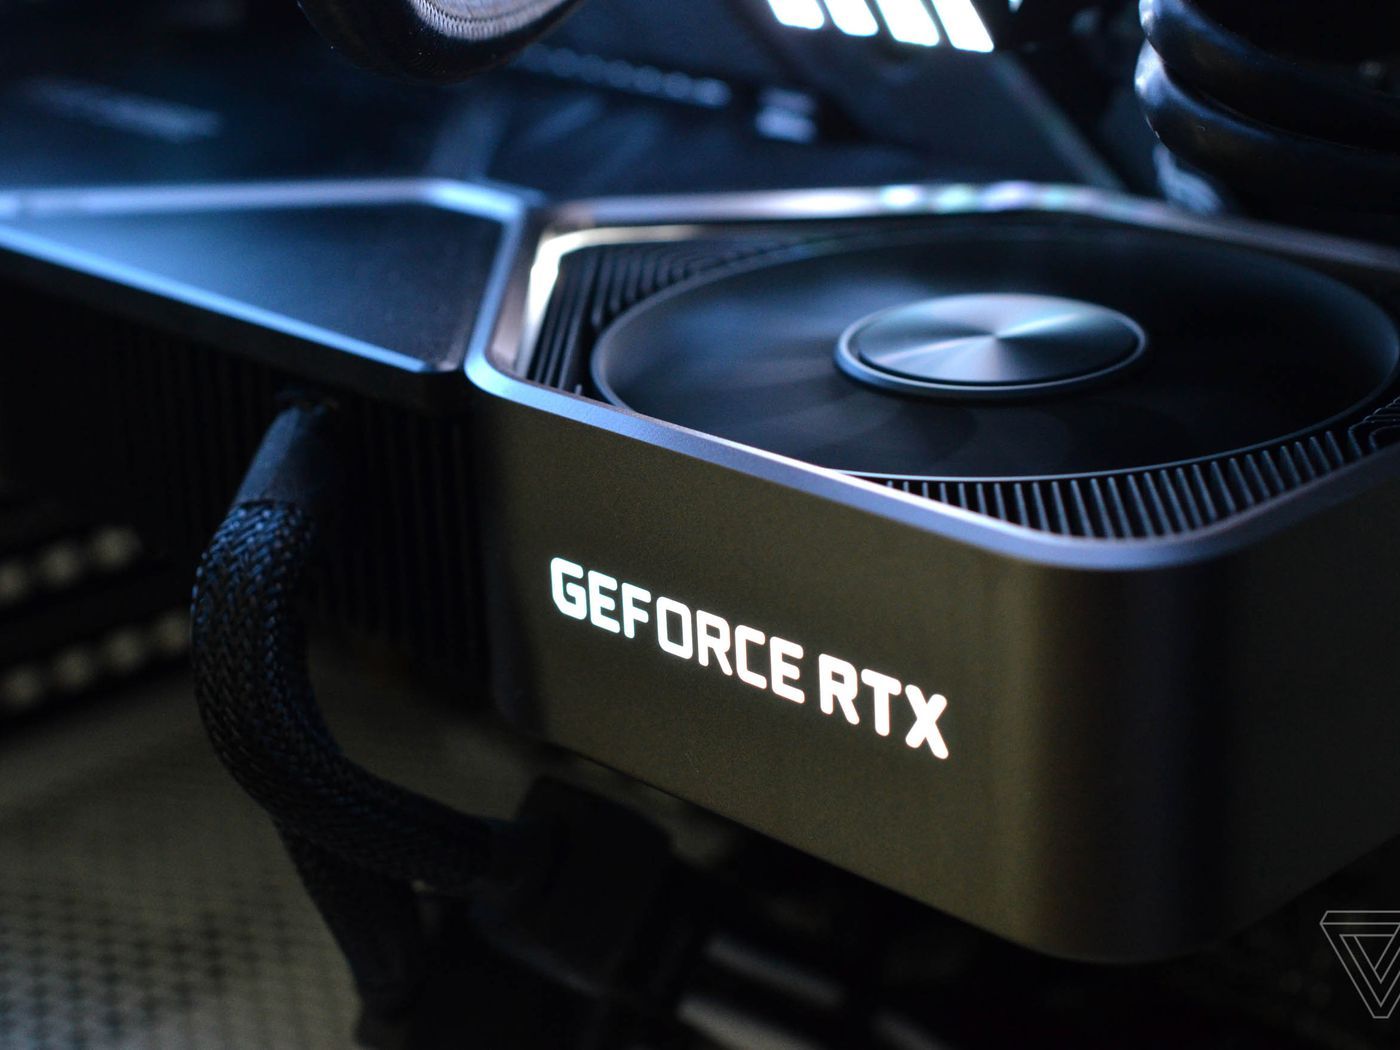 Here's why PC builders are demanding to know how many capacitors are in the RTX 3080